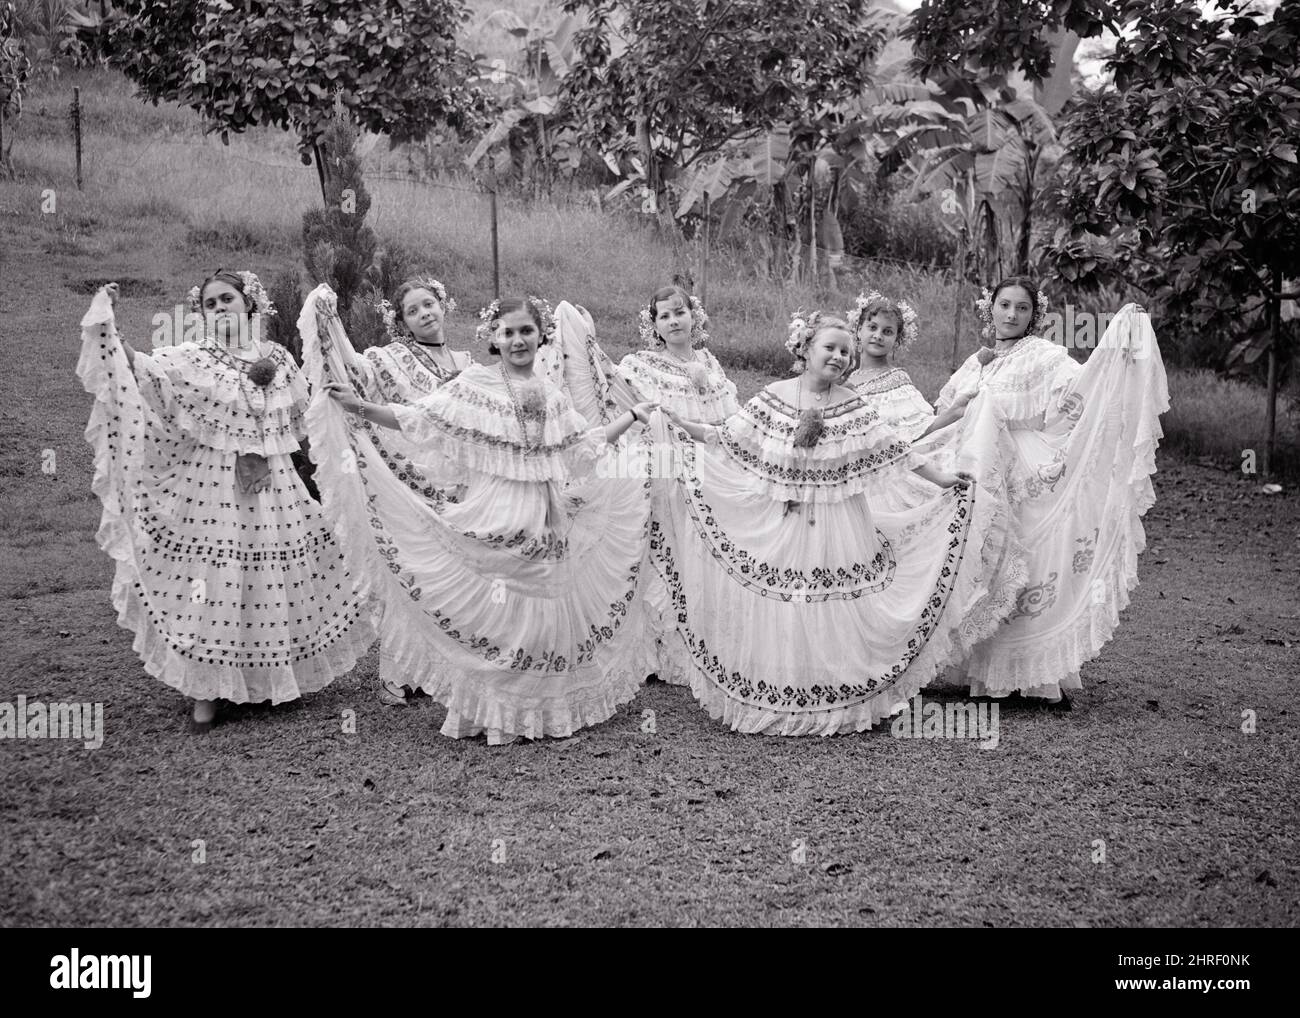 1930s 1940s 7 WOMEN IN TRADITIONAL PANAMANIAN COSTUMES THE FULL SKIRT POLLERA AND OFF THE SHOULDER BLOUSE PANAMA CENTRAL AMERICA - r66 PAL001 HARS ACTOR HISTORY CELEBRATION FEMALES RURAL LUXURY COPY SPACE FULL-LENGTH LADIES PERSONS INSPIRATION TRADITIONAL ENTERTAINMENT CONFIDENCE B&W YARN EYE CONTACT PERFORMING ARTS WIDE ANGLE EMBROIDERY HAPPINESS PANAMA PERFORMER STYLES AND SEVEN PRIDE BLOUSE ENTERTAINER OCCUPATIONS CONCEPTUAL 7 ACTORS CULTURE FOLK RUFFLES STYLISH CREATIVITY ENTERTAINERS FASHIONS PERFORMERS YOUNG ADULT WOMAN BLACK AND WHITE CENTRAL AMERICA EMBROIDERED FOLKLORIC HANDMADE Stock Photo